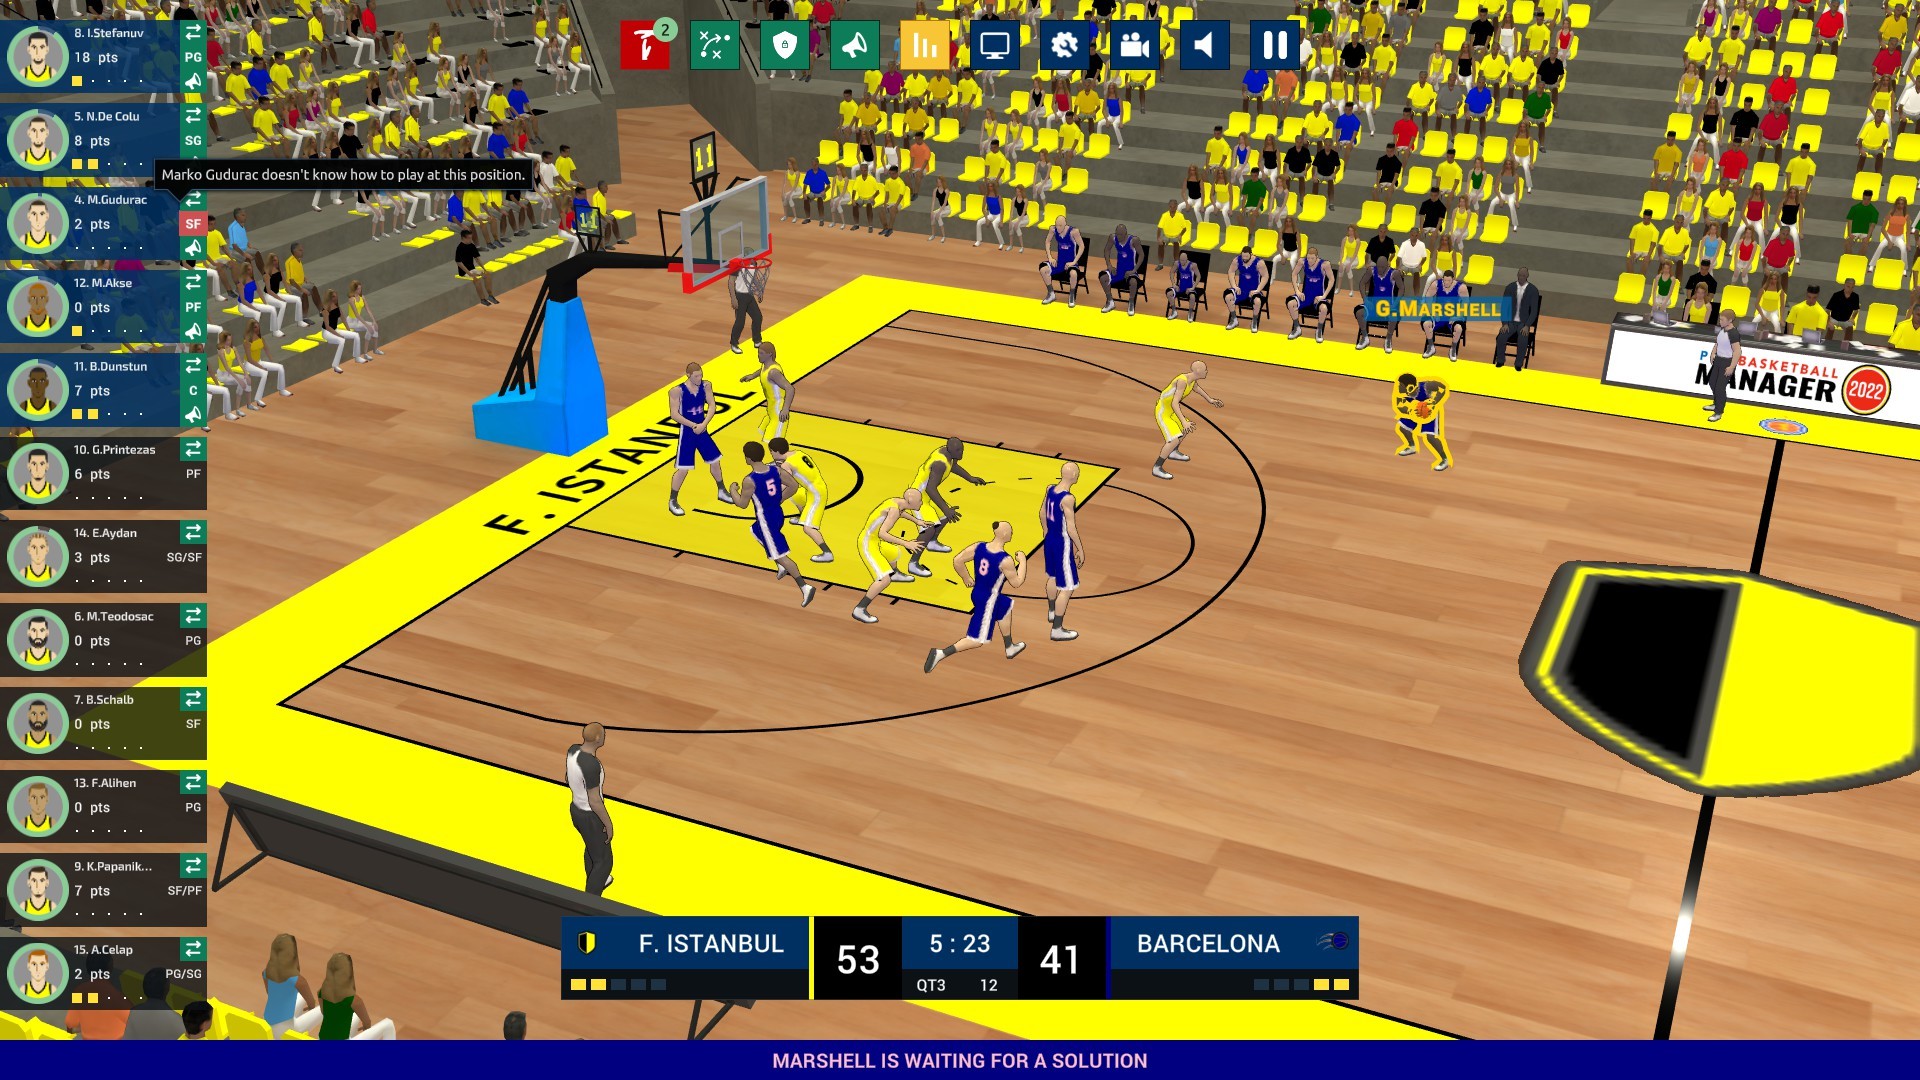 Pro Basketball Manager 2022 on Steam